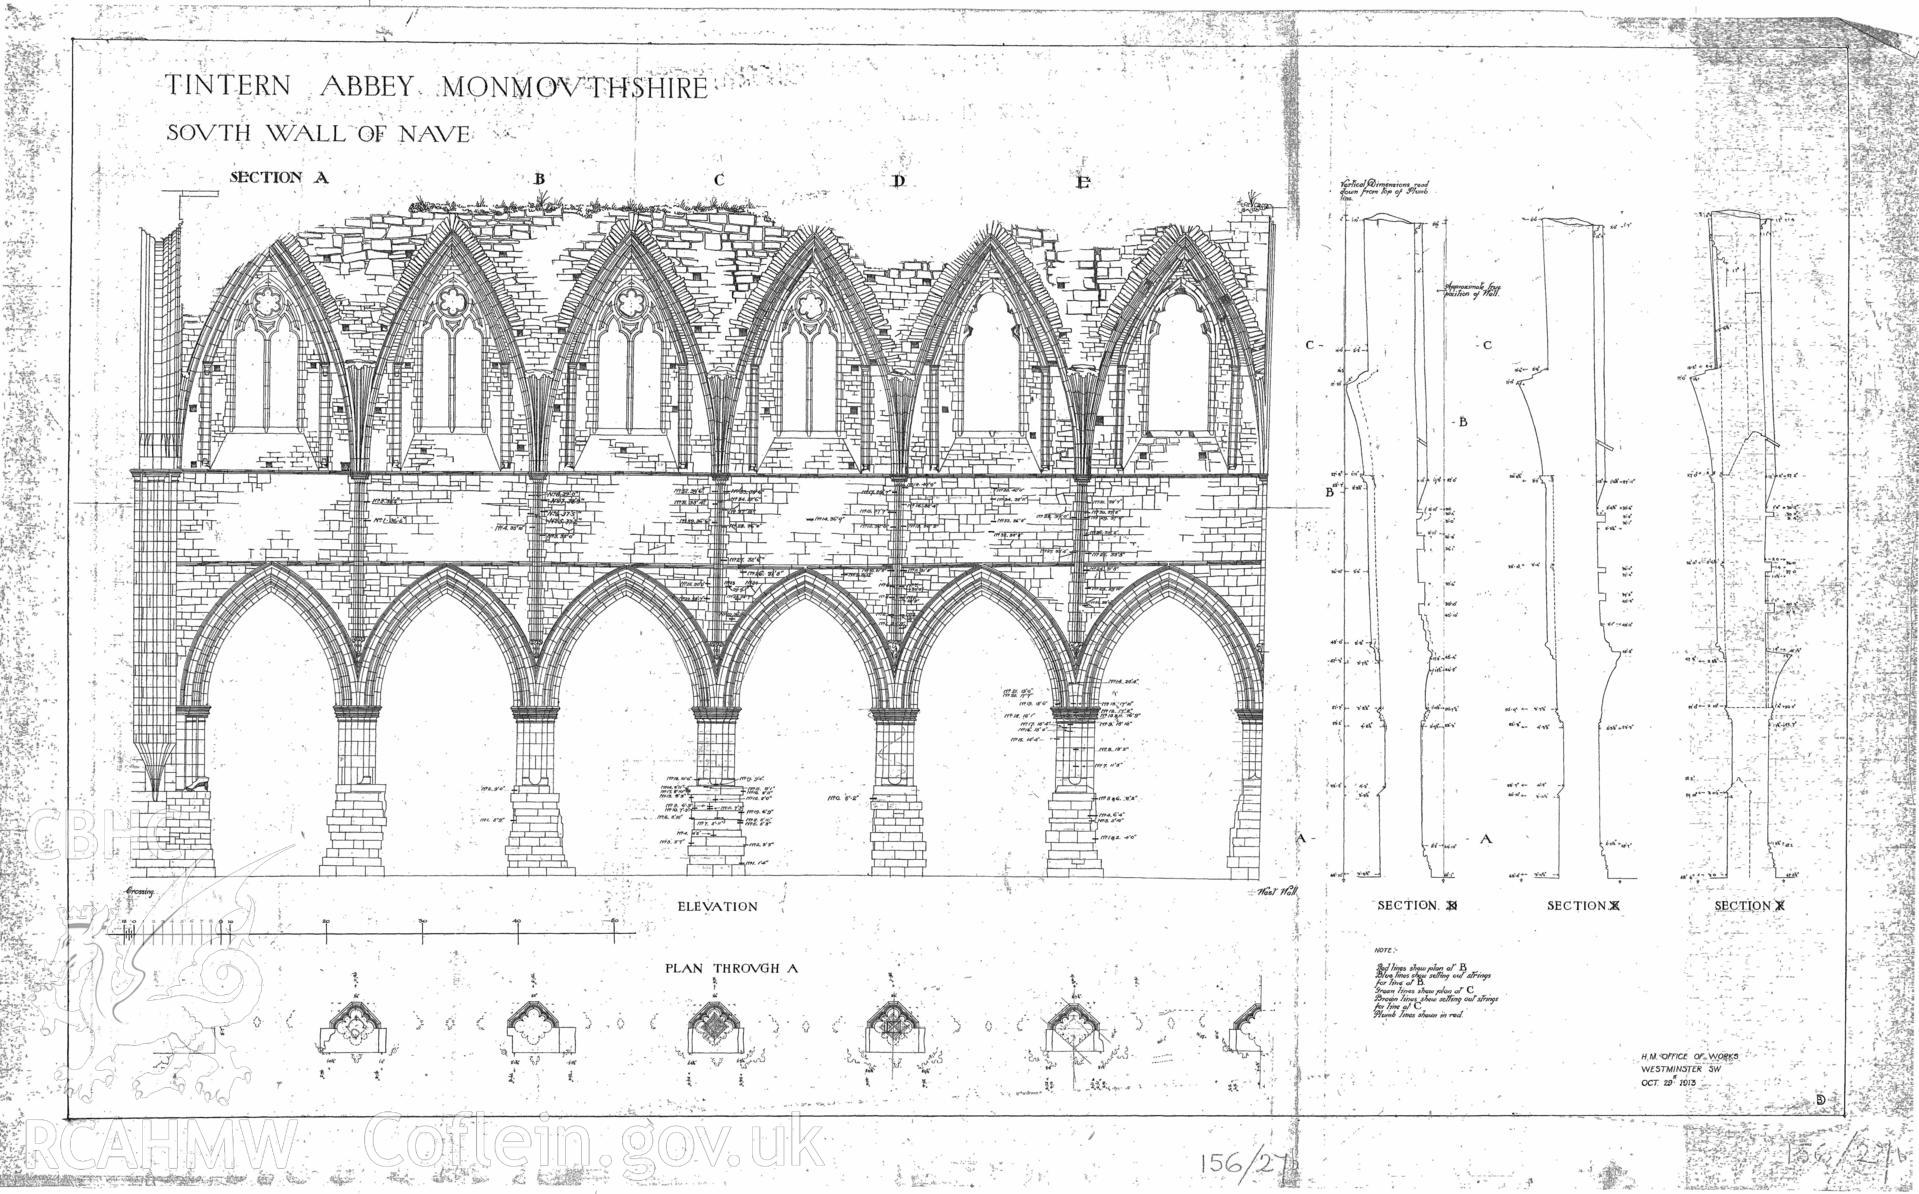 Cadw guardianship monument drawing of Tintern Abbey. Plan through South wall of Nave. Cadw ref. No. 156/27b. Various scales.